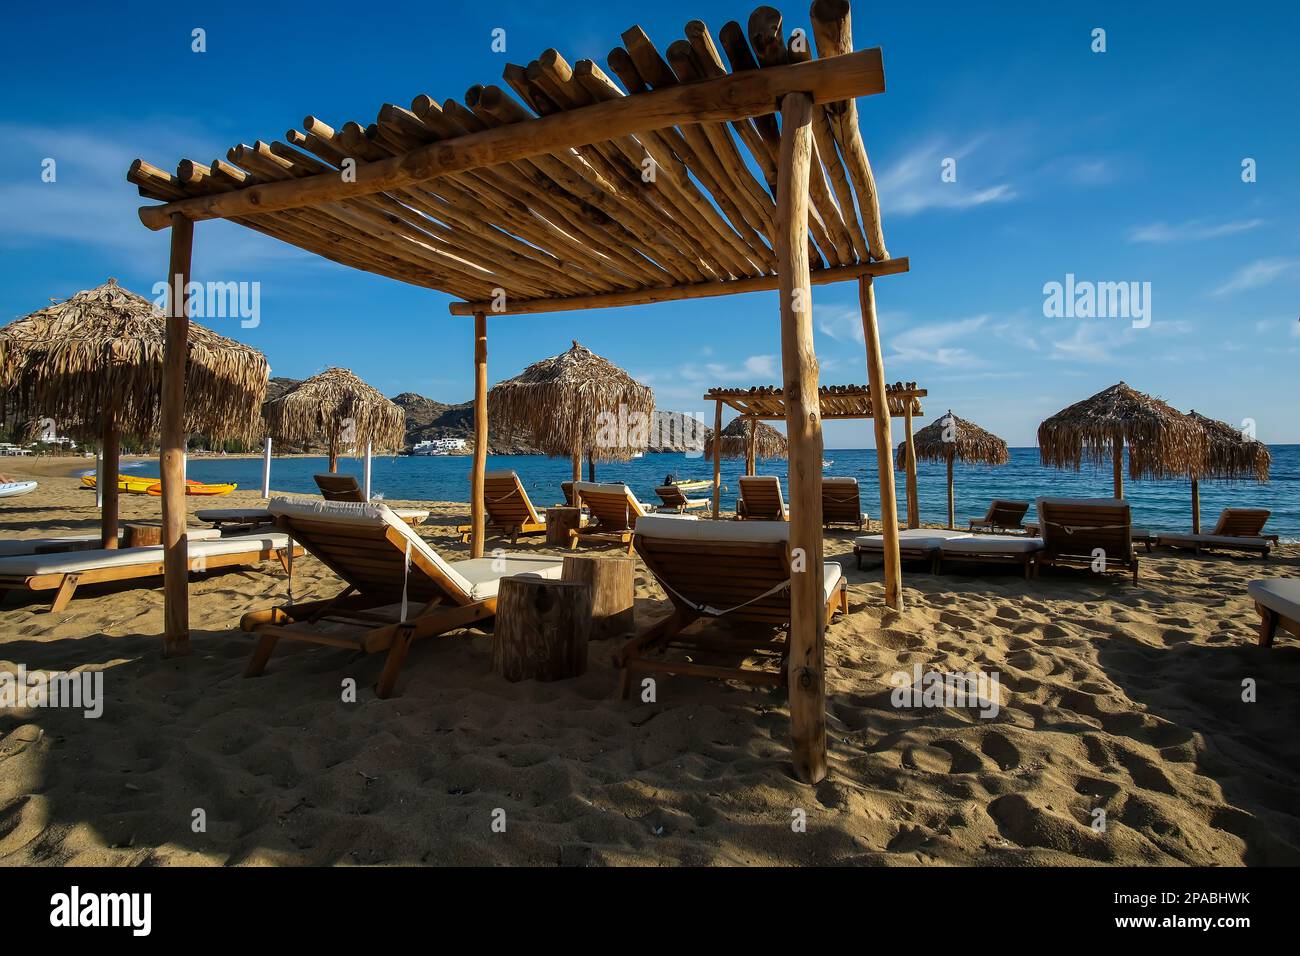 View of luxury sun beds and sun umbrellas at the famous Mylopotas beach in Ios Greece Stock Photo